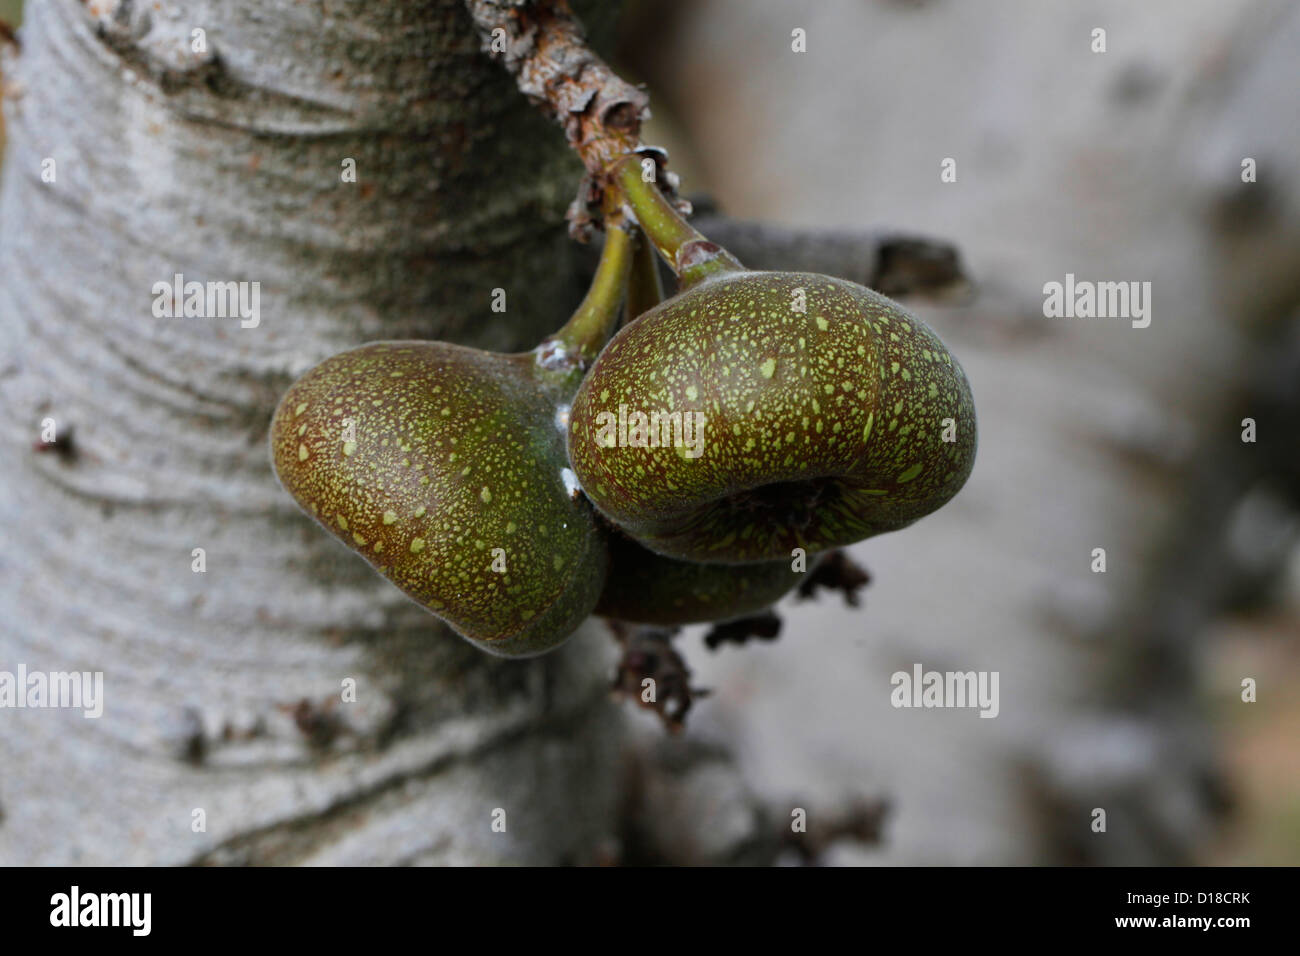 Fruits of Roxburgh Fig or Ficus auriculata, China Stock Photo